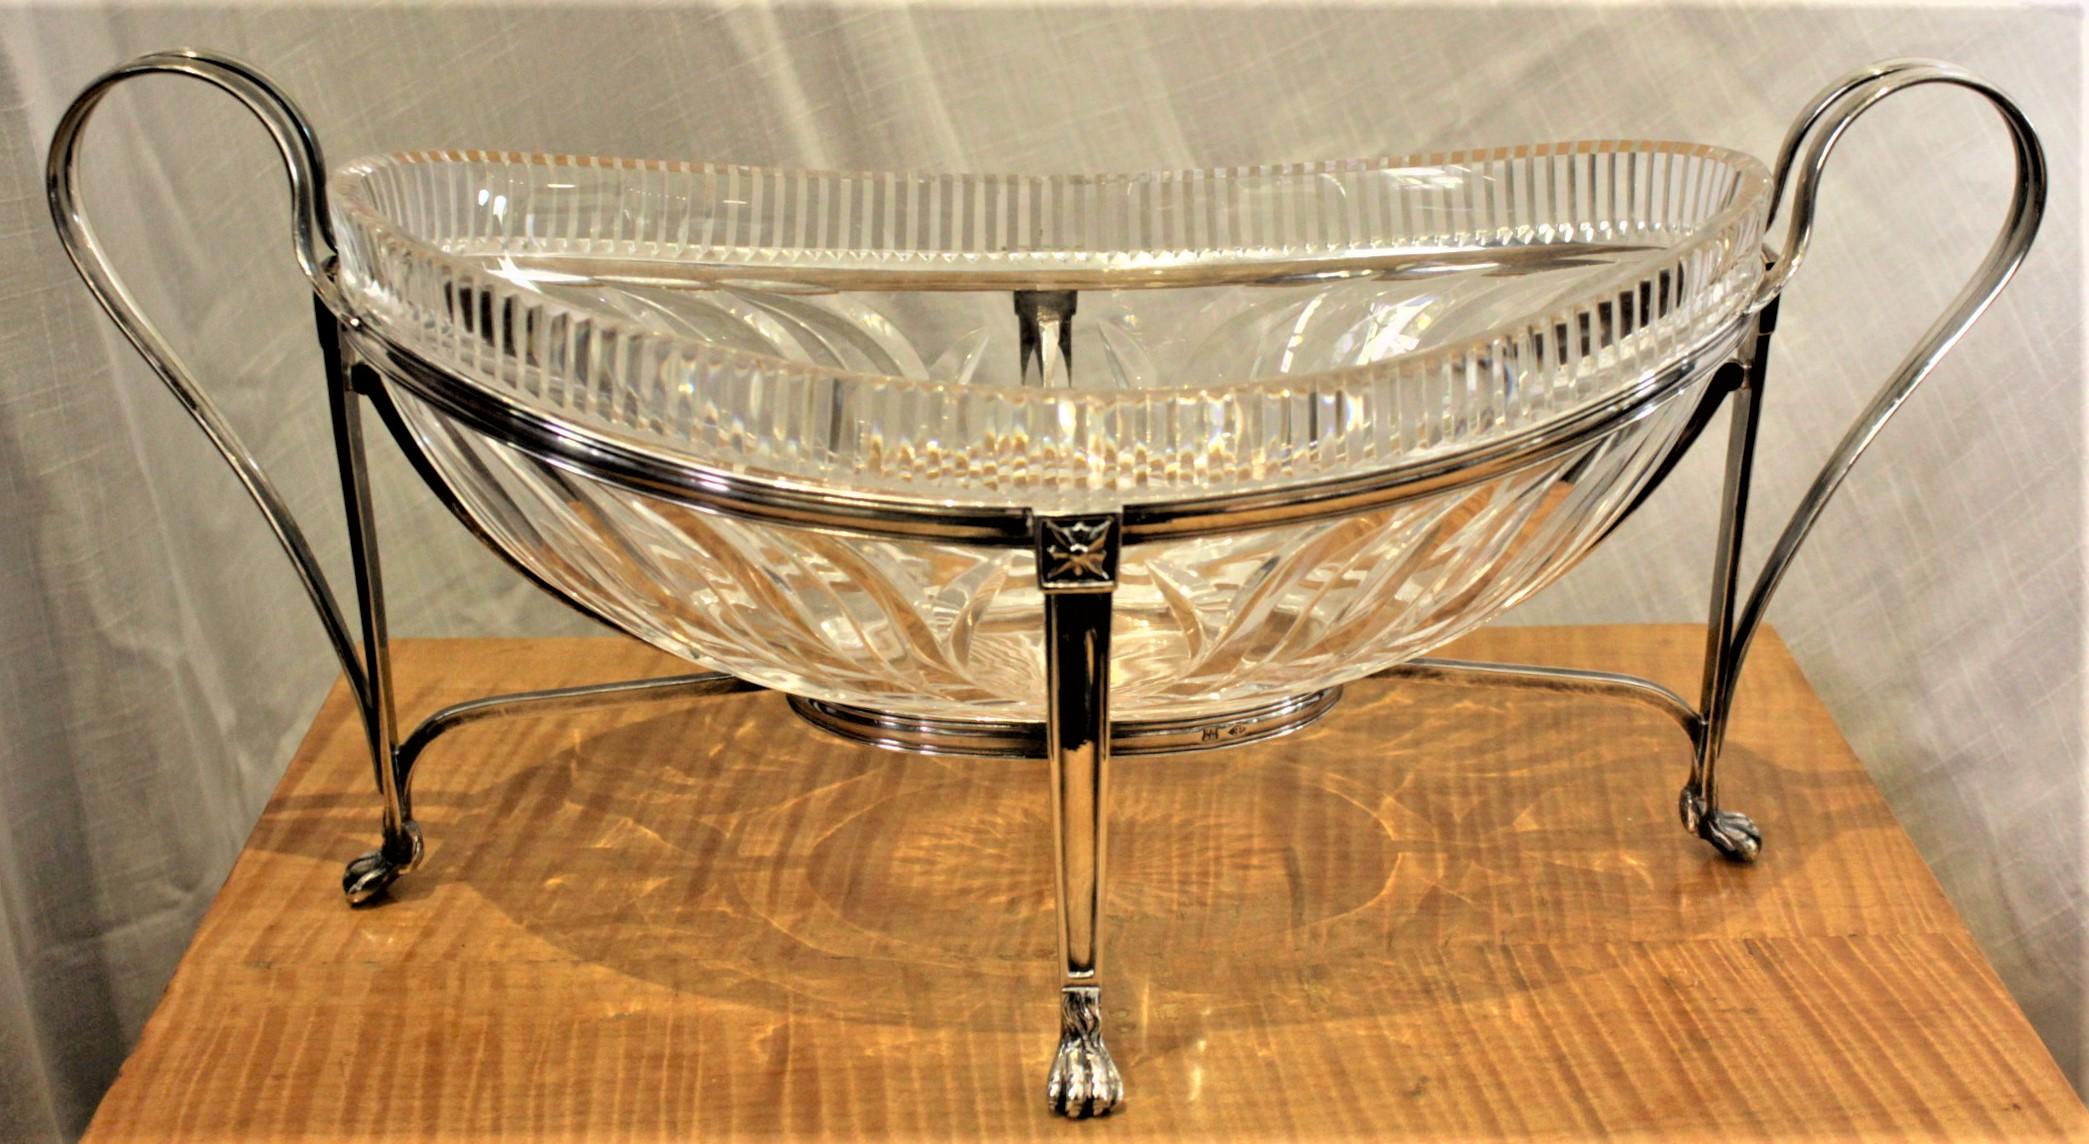 This antique cut crystal and silver plated centerpiece bowl is hallmarked, but the maker is unknown but presumed to be of European origin and was done in approximately 1880. The crystal oval bowl is very nicely faceted around the outside and of the